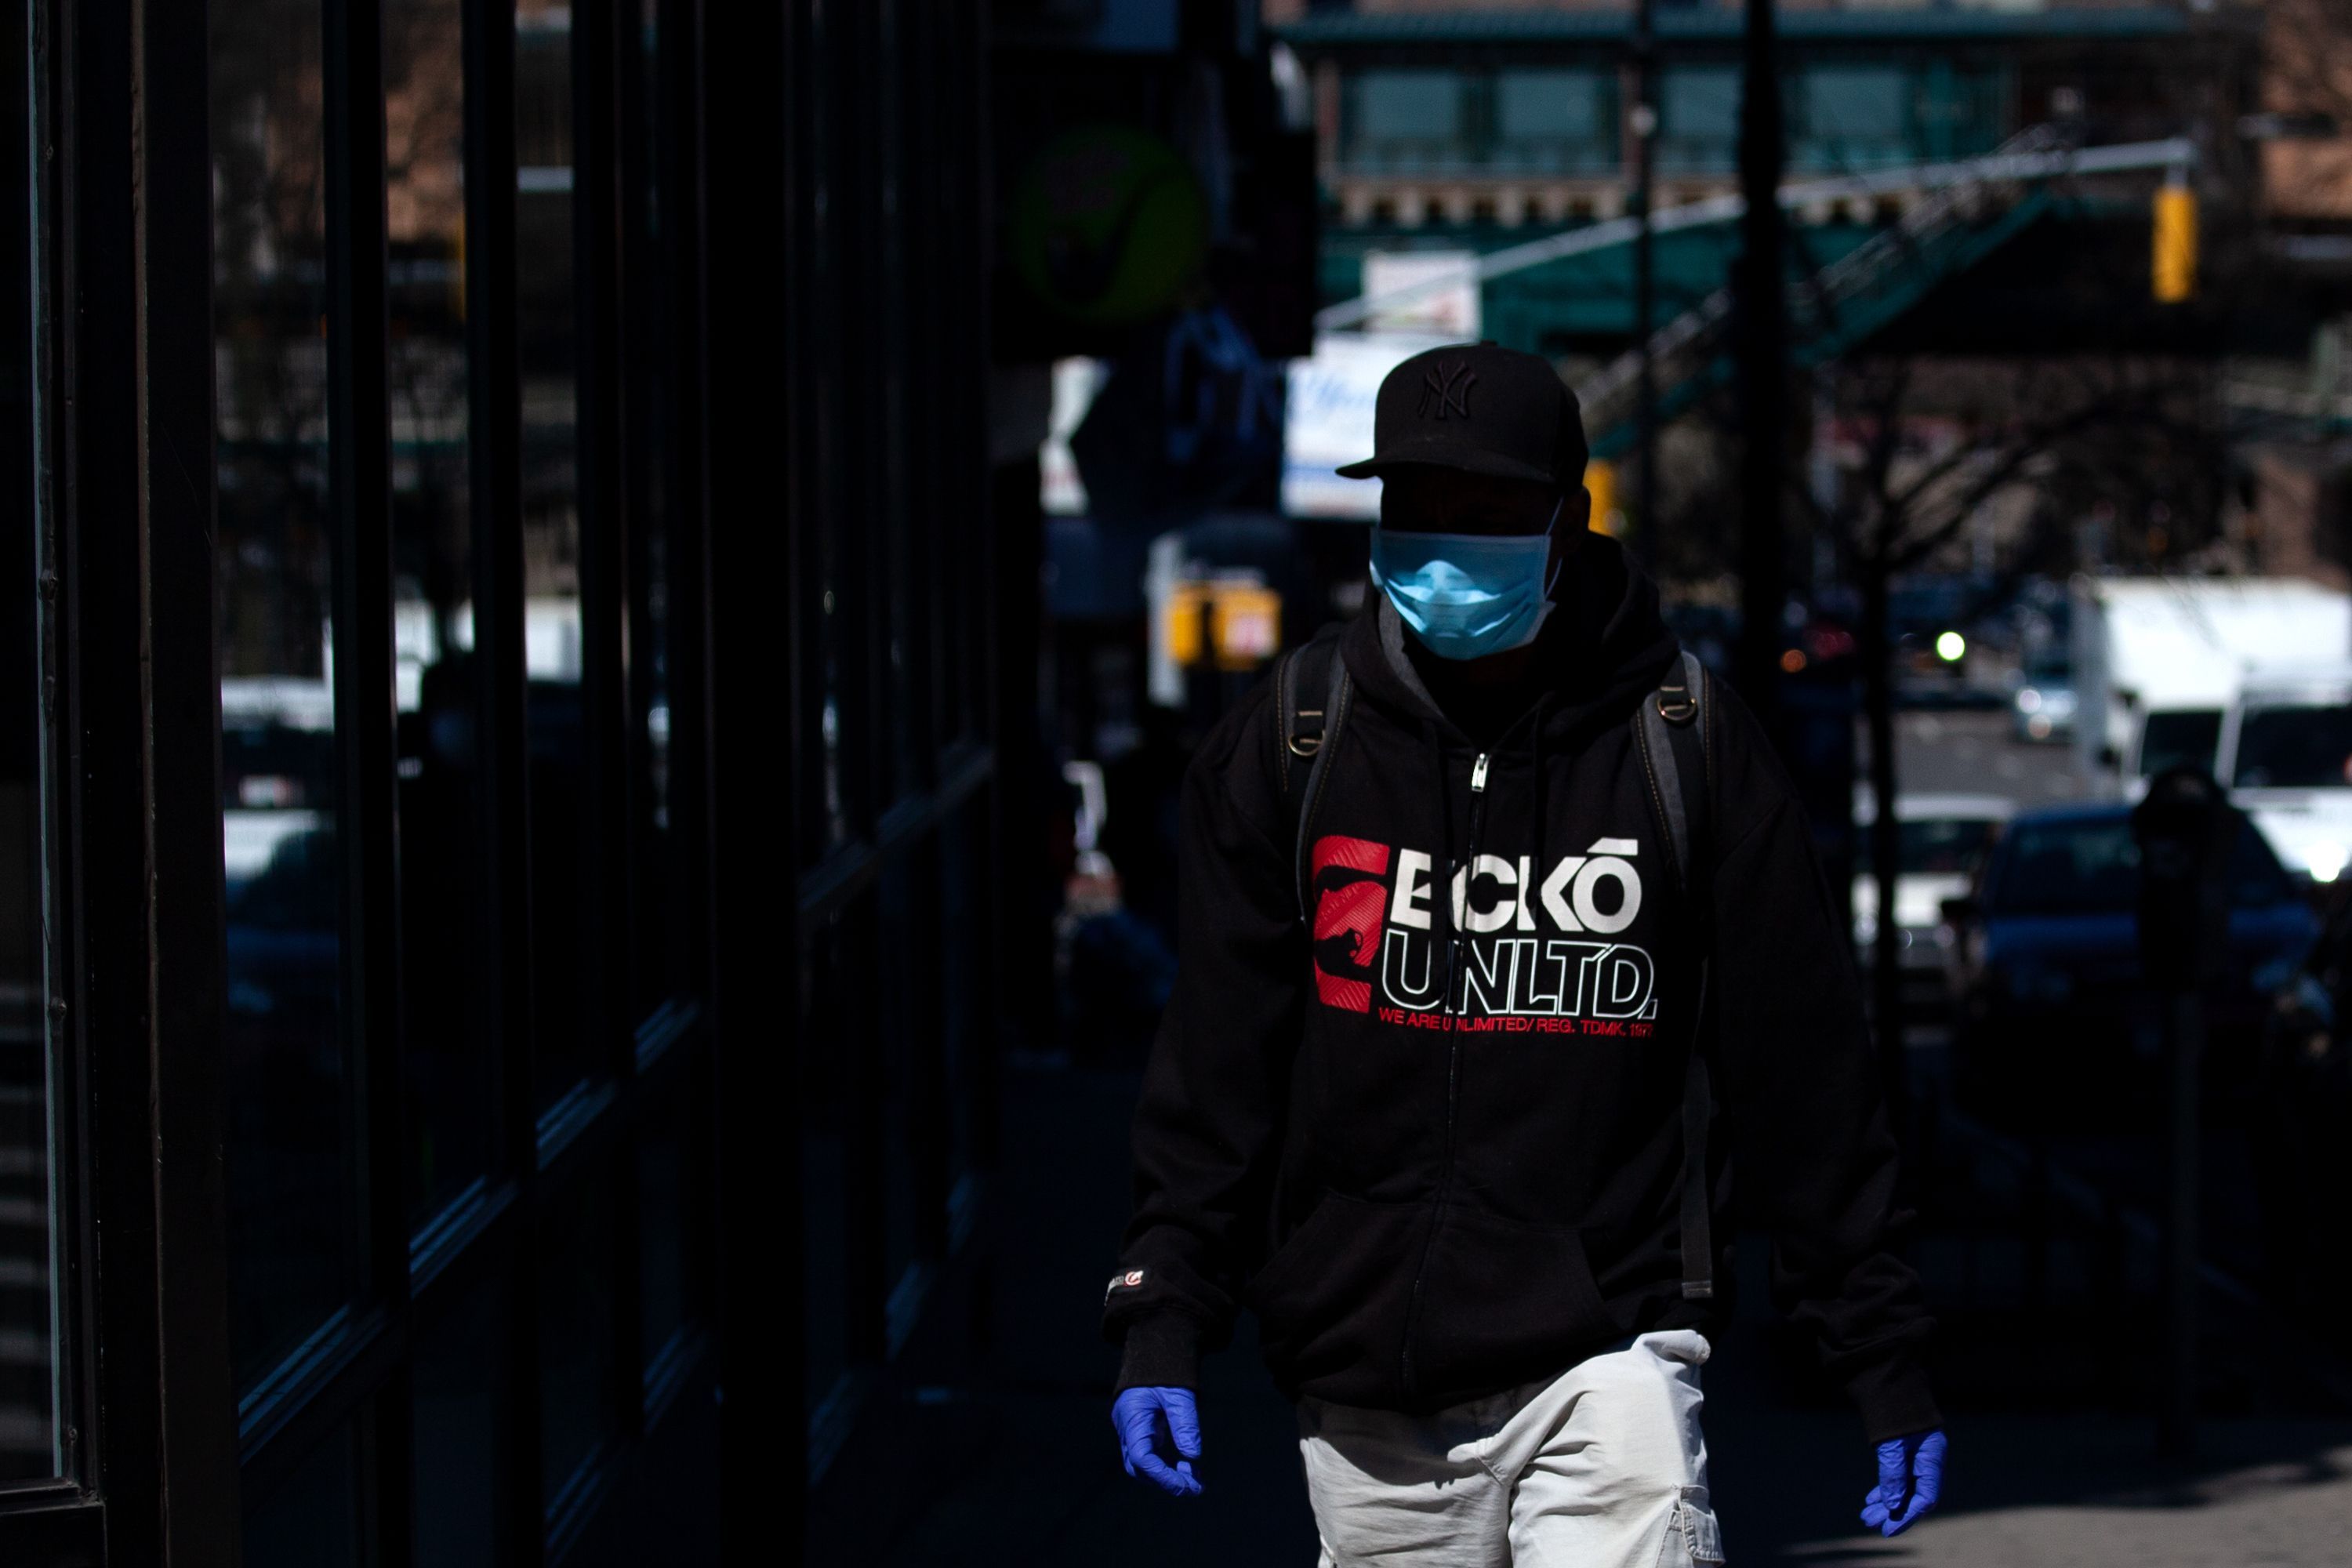 A man wears a mask in the South Bronx during the coronavirus outbreak.